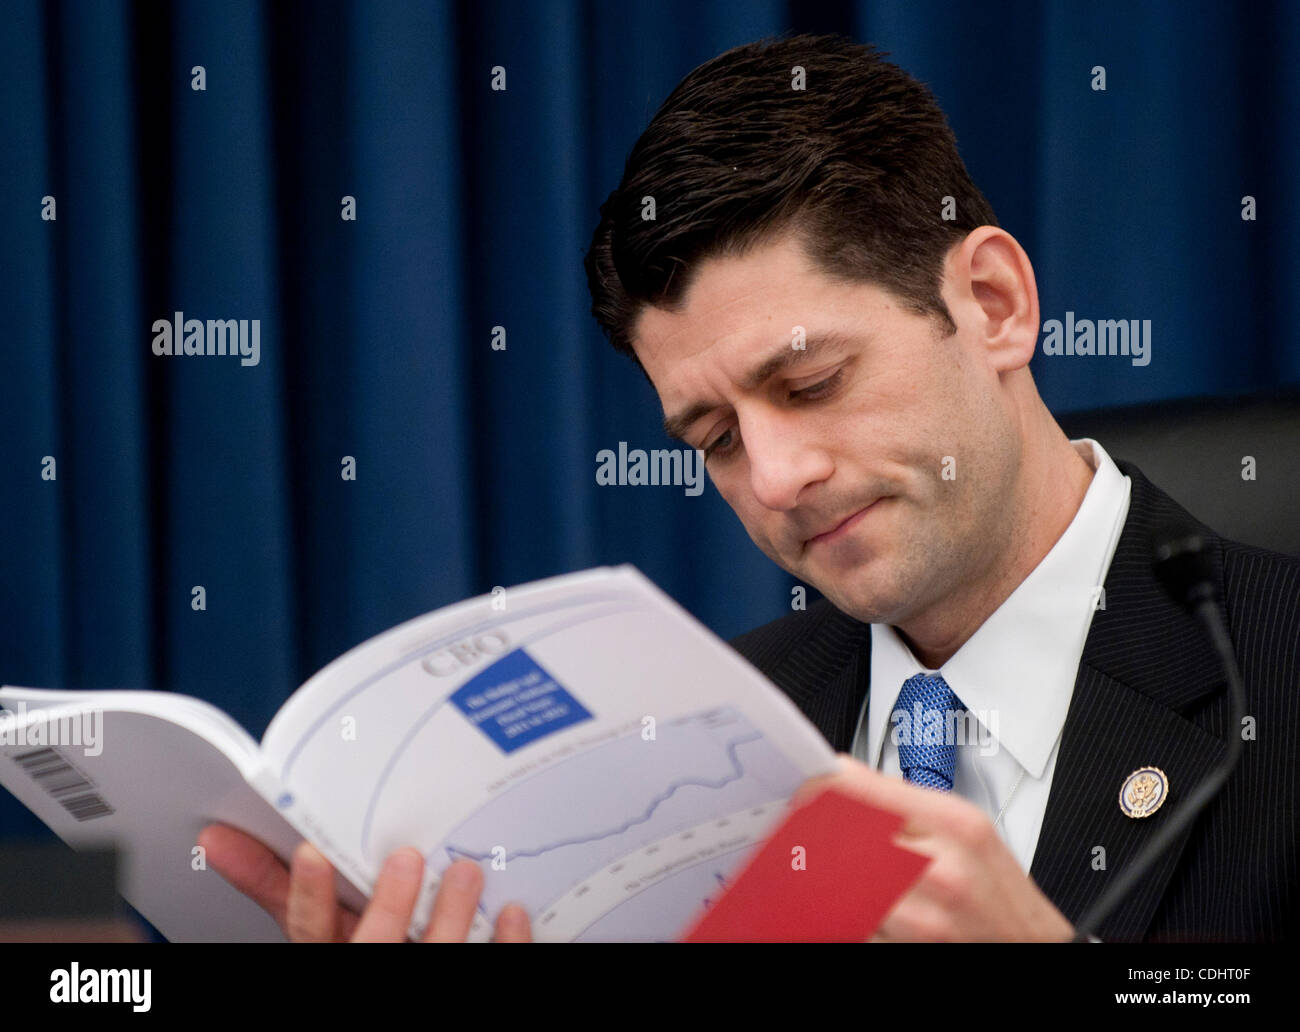 Feb 10, 2011 - Washington, District of Columbia, U.S. - House Budget Committee Chairman Rep. PAUL RYAN (R-WI) looks over the Congressional Budget Office's Budget and Economic Outlook Report before hearing testimony from CBO Director Elmendorf on Thursday. (Credit Image: © Pete Marovich/ZUMAPRESS.com Stock Photo